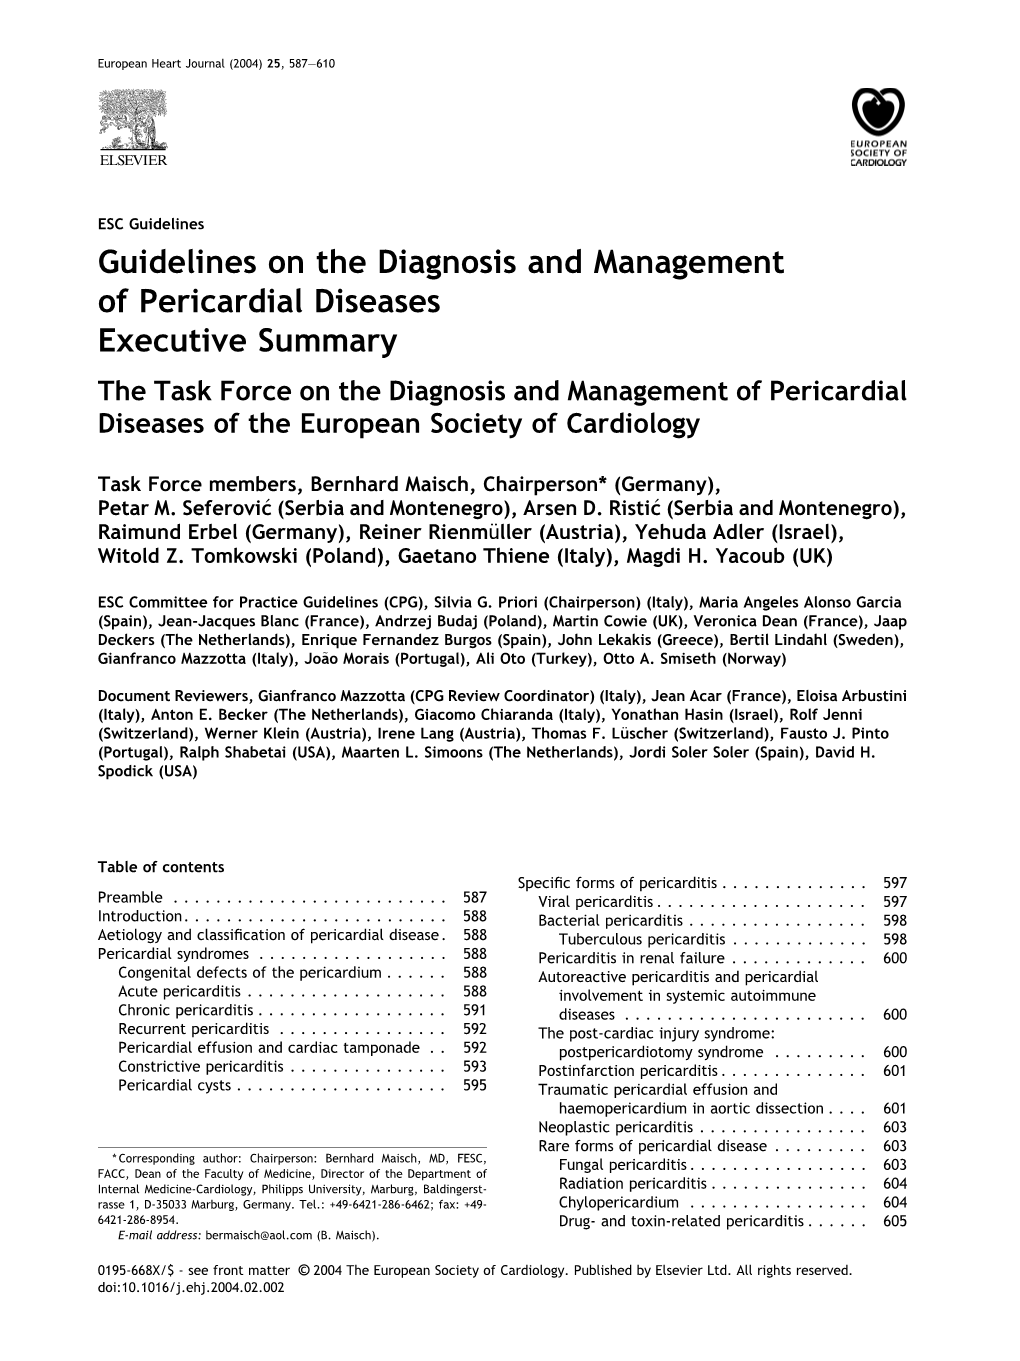 Guidelines on the Diagnosis and Management of Pericardial Diseases